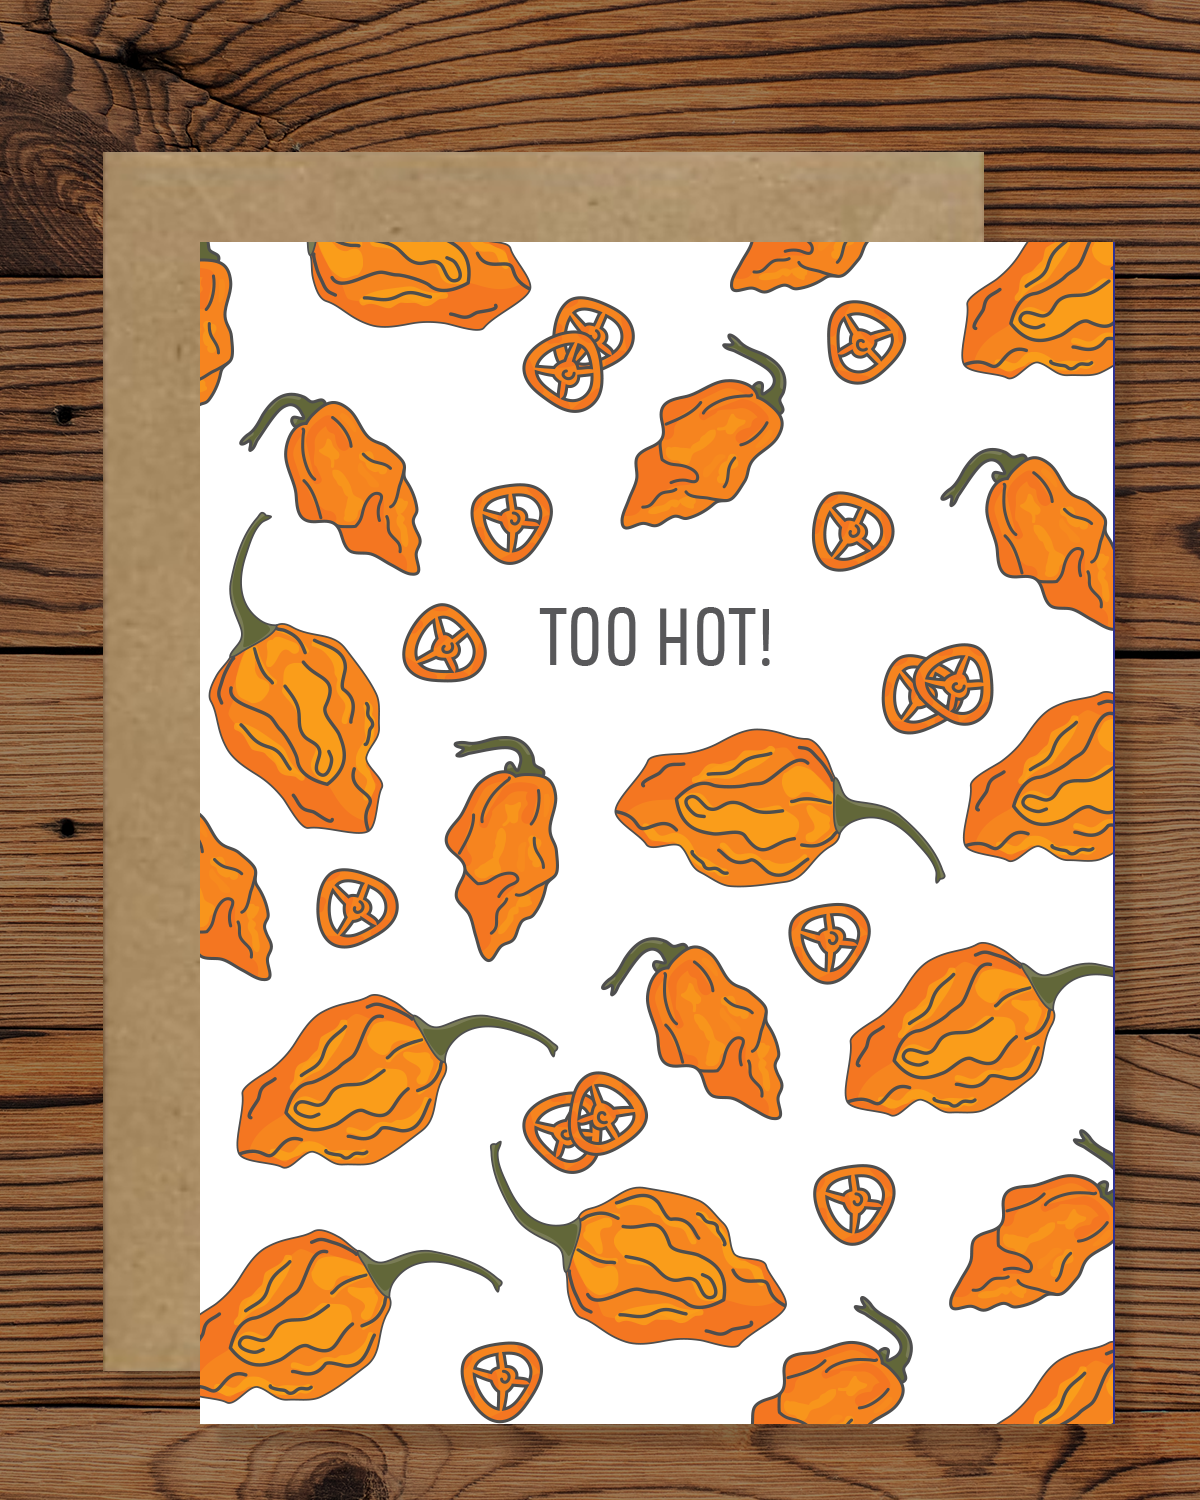 Spice up your expressions of love and friendship with our high-quality 'Too Hot Habanero' greeting card! Send warmth and affection with a touch of heat. Perfect for igniting connections. Order now!